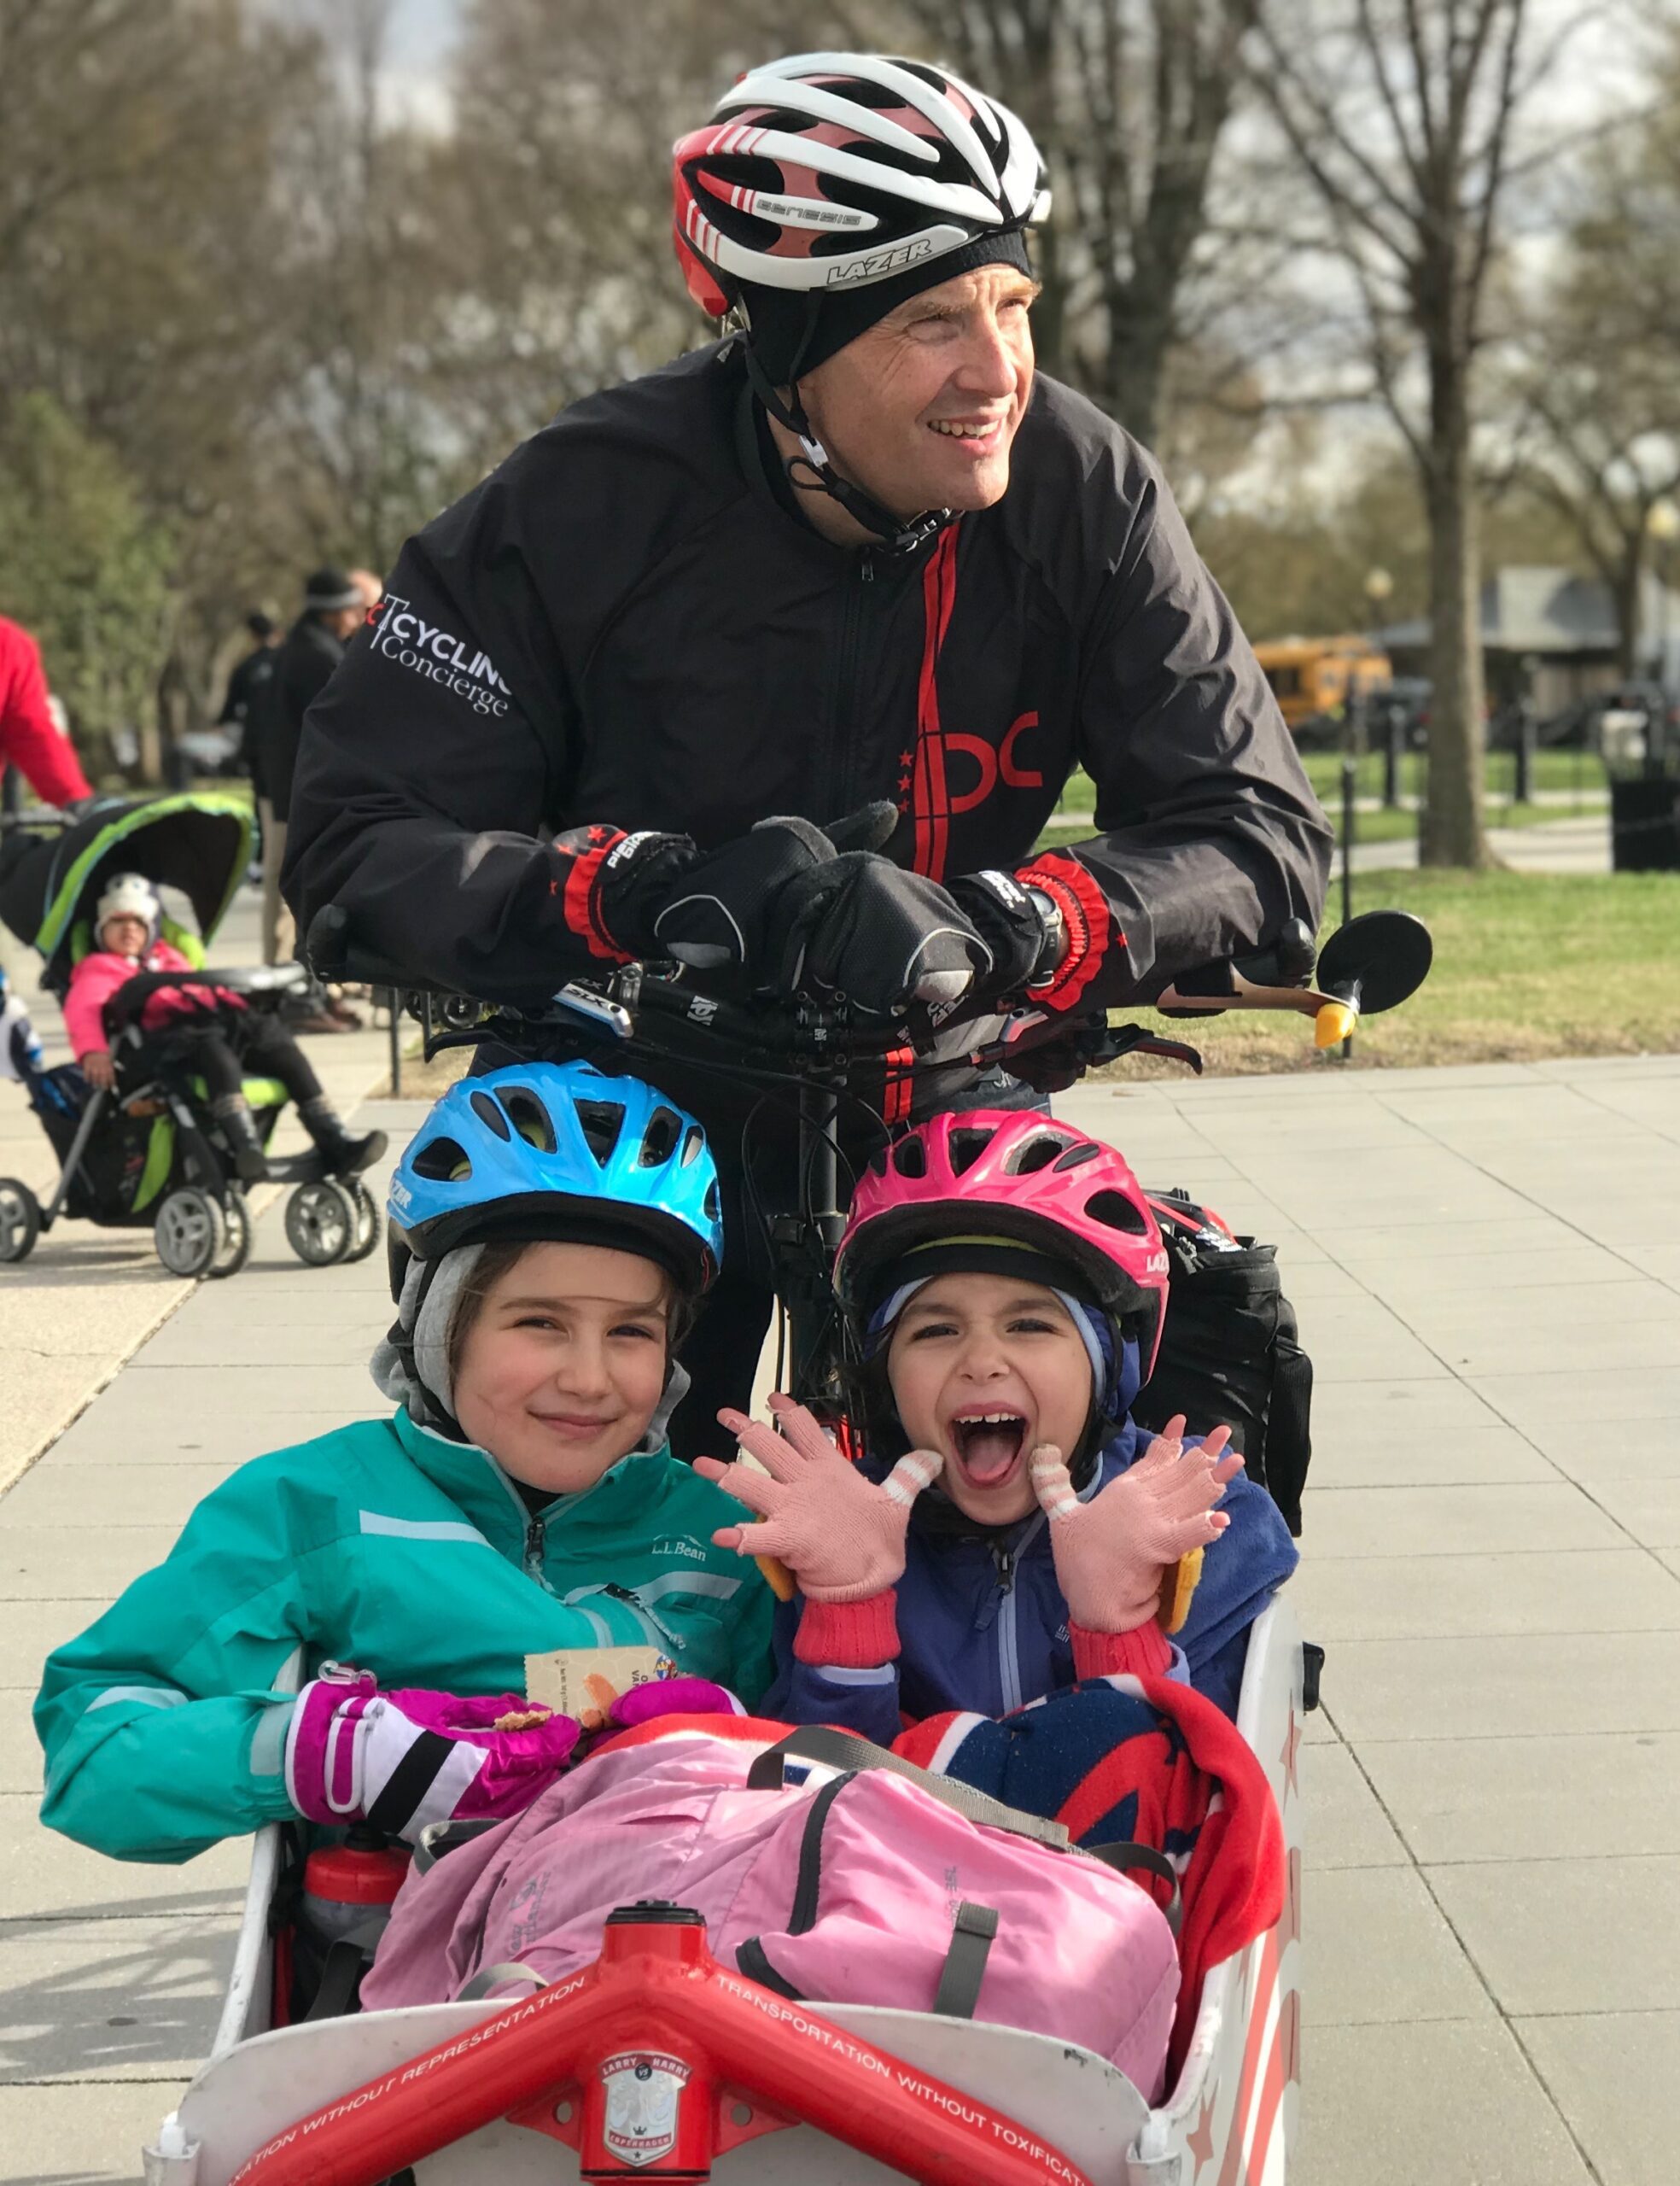 BellRinger rider and his daughters on a sidewalk